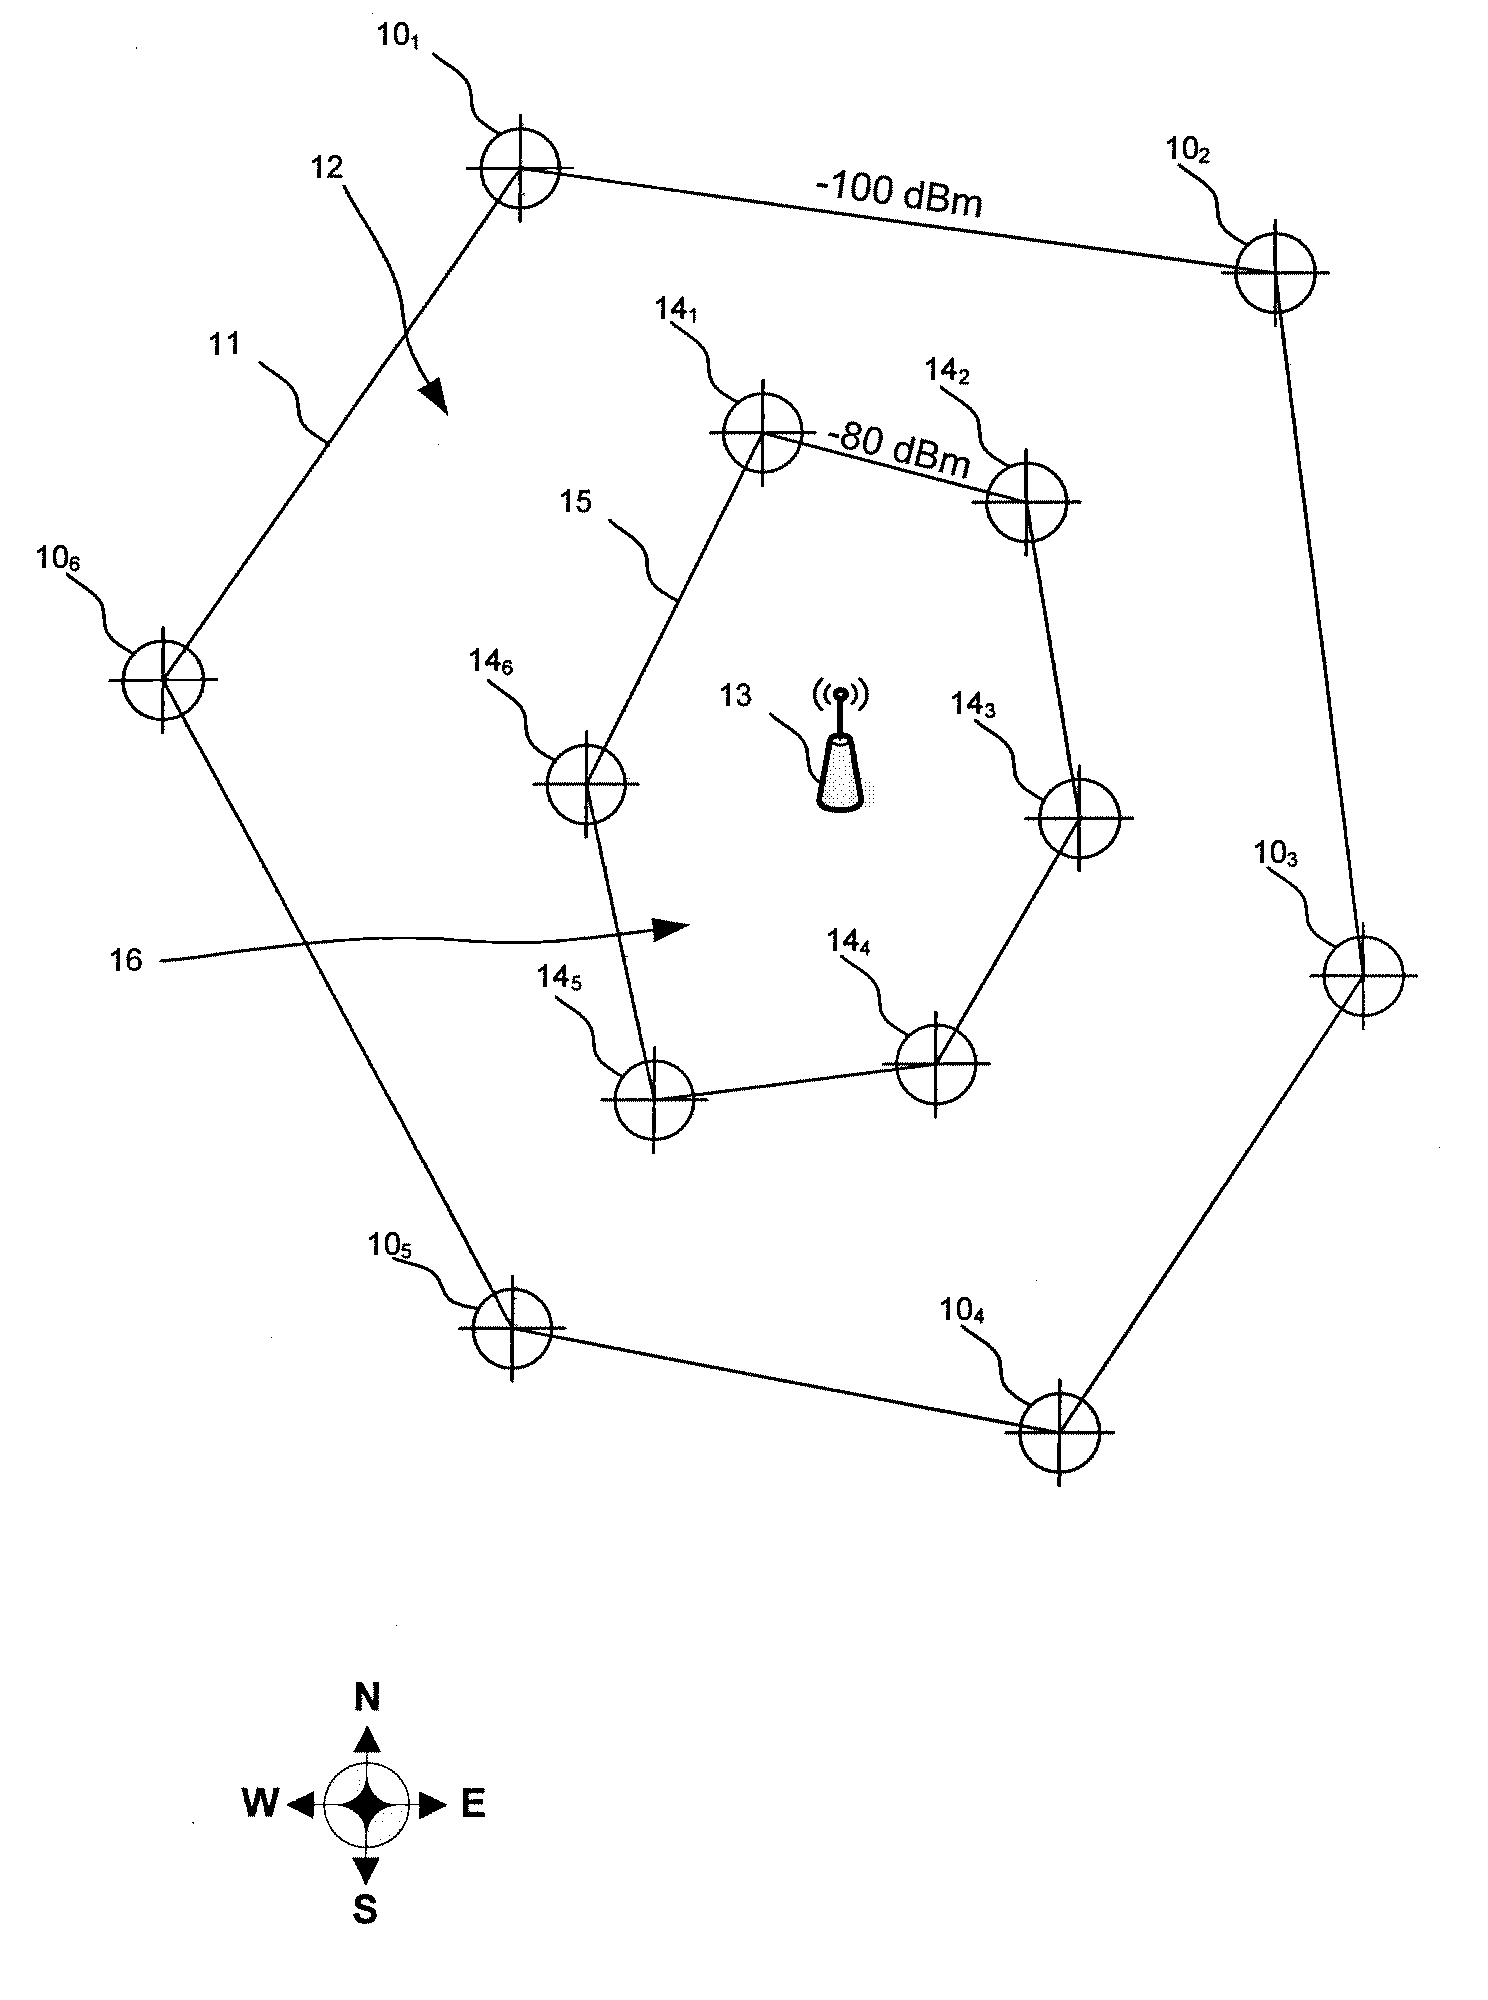 Cell id based positioning from cell intersections